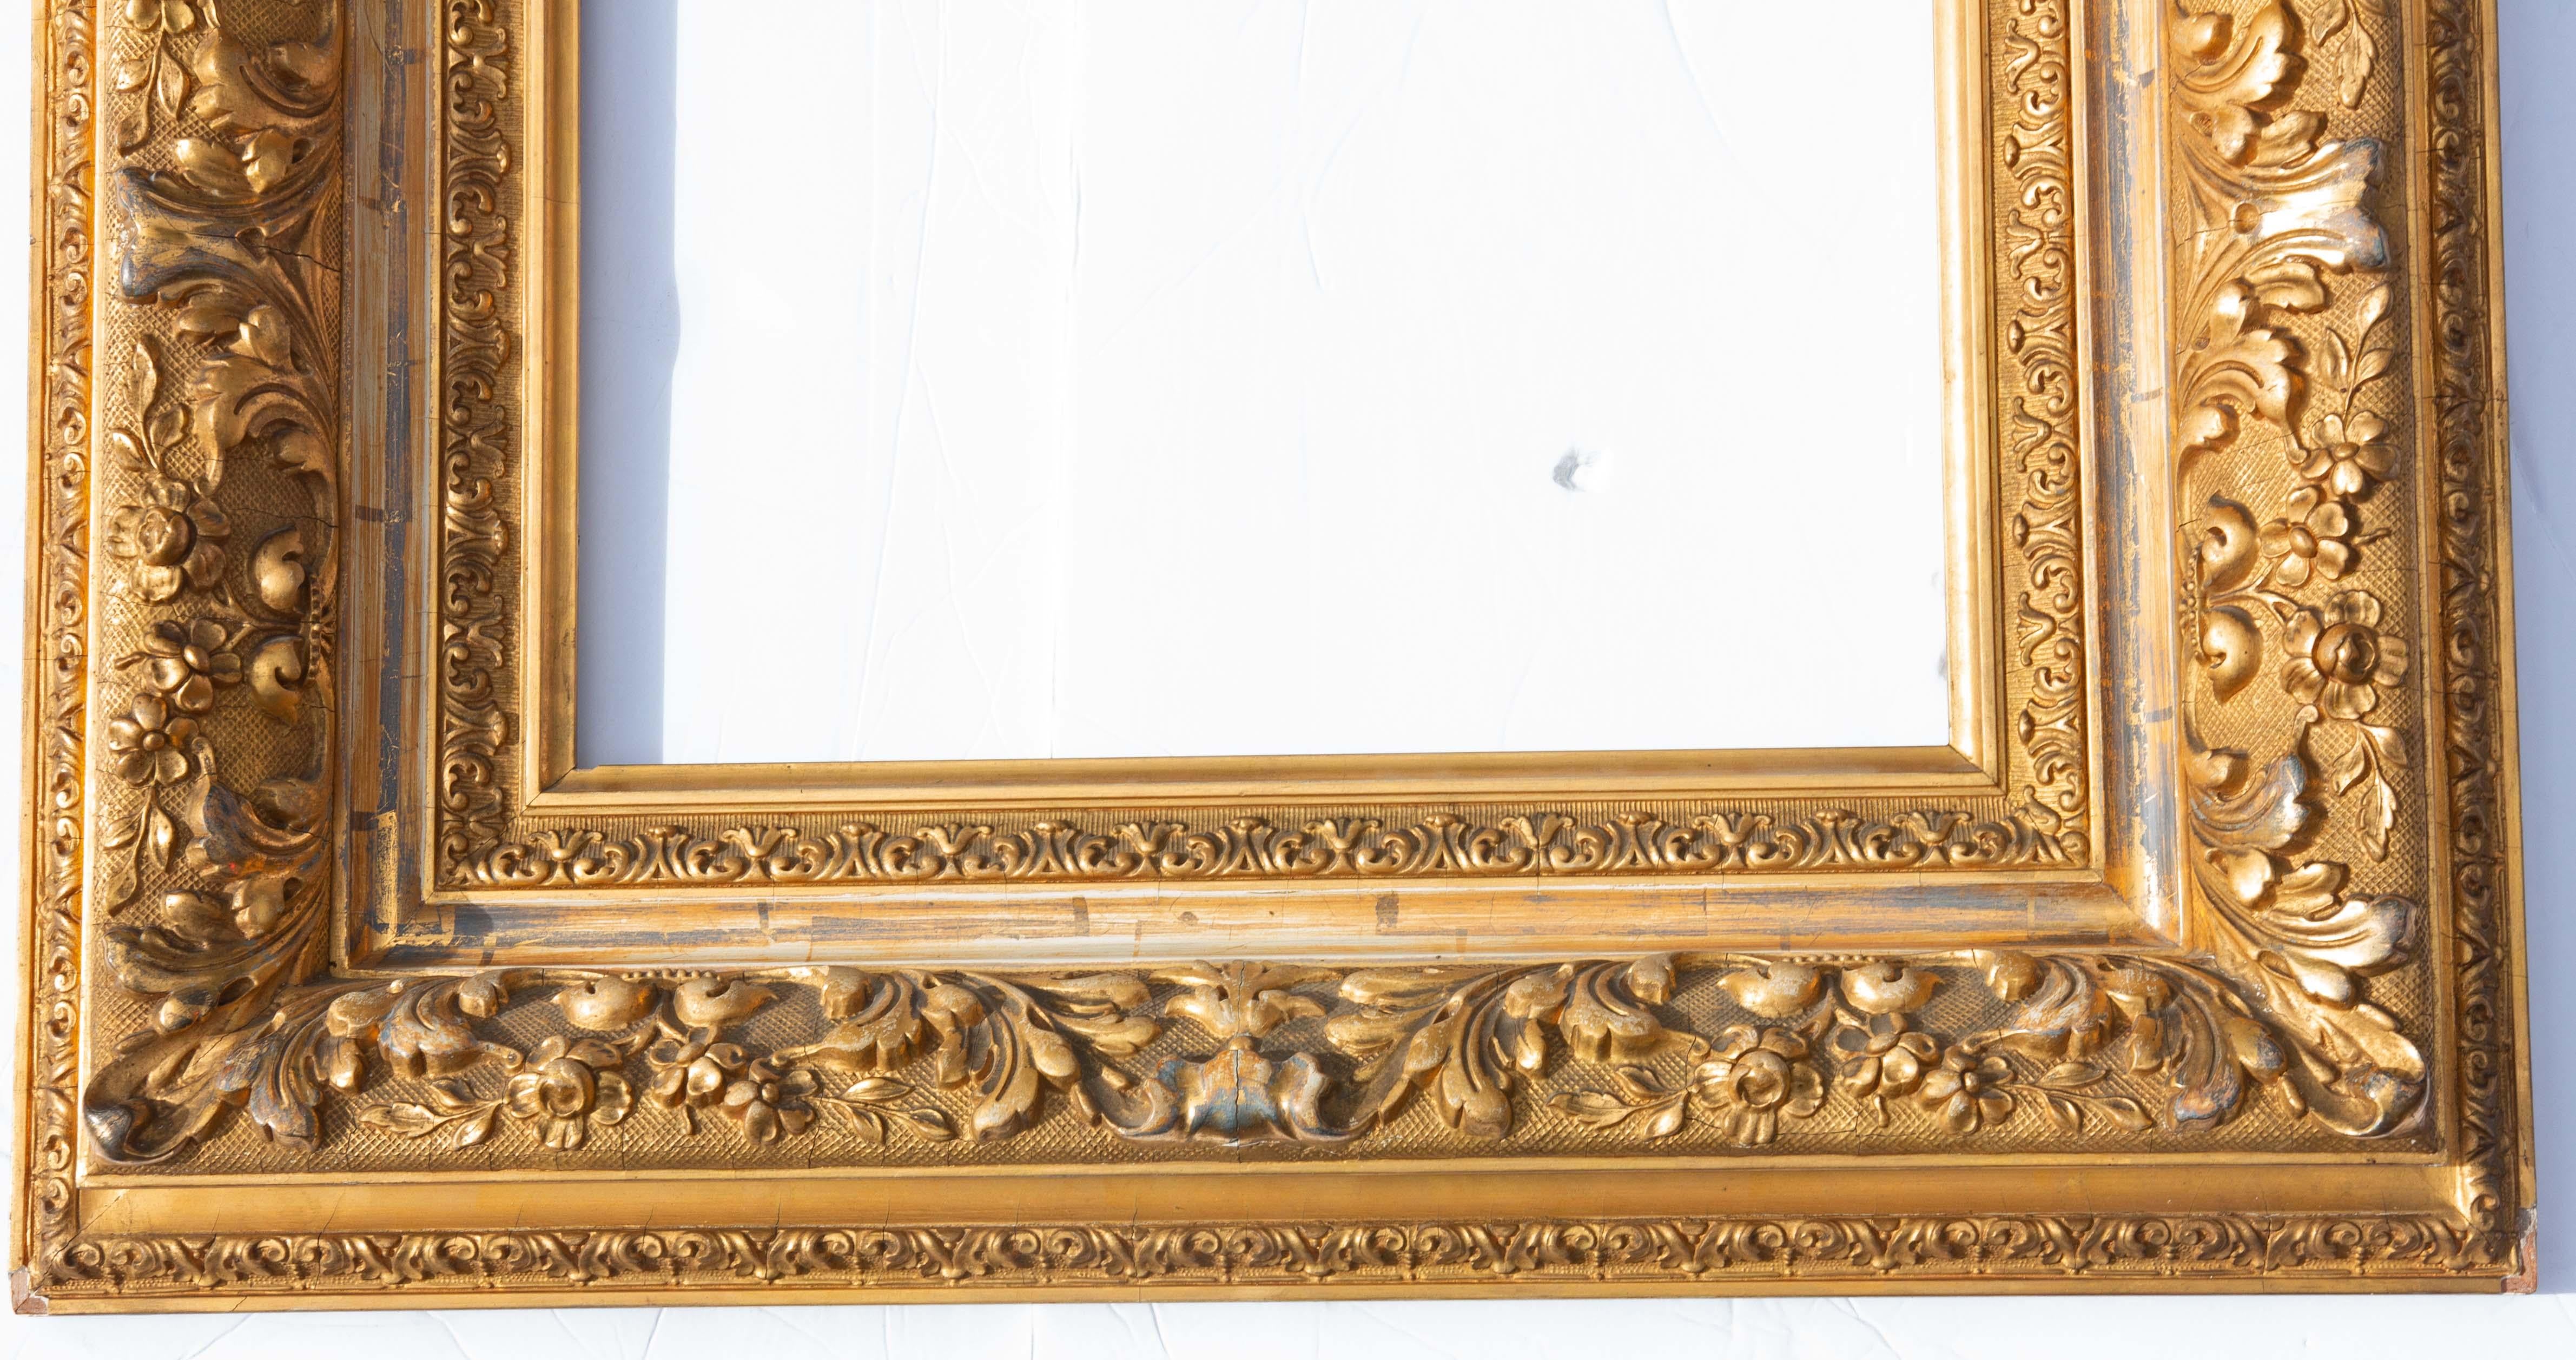 19th century picture frames